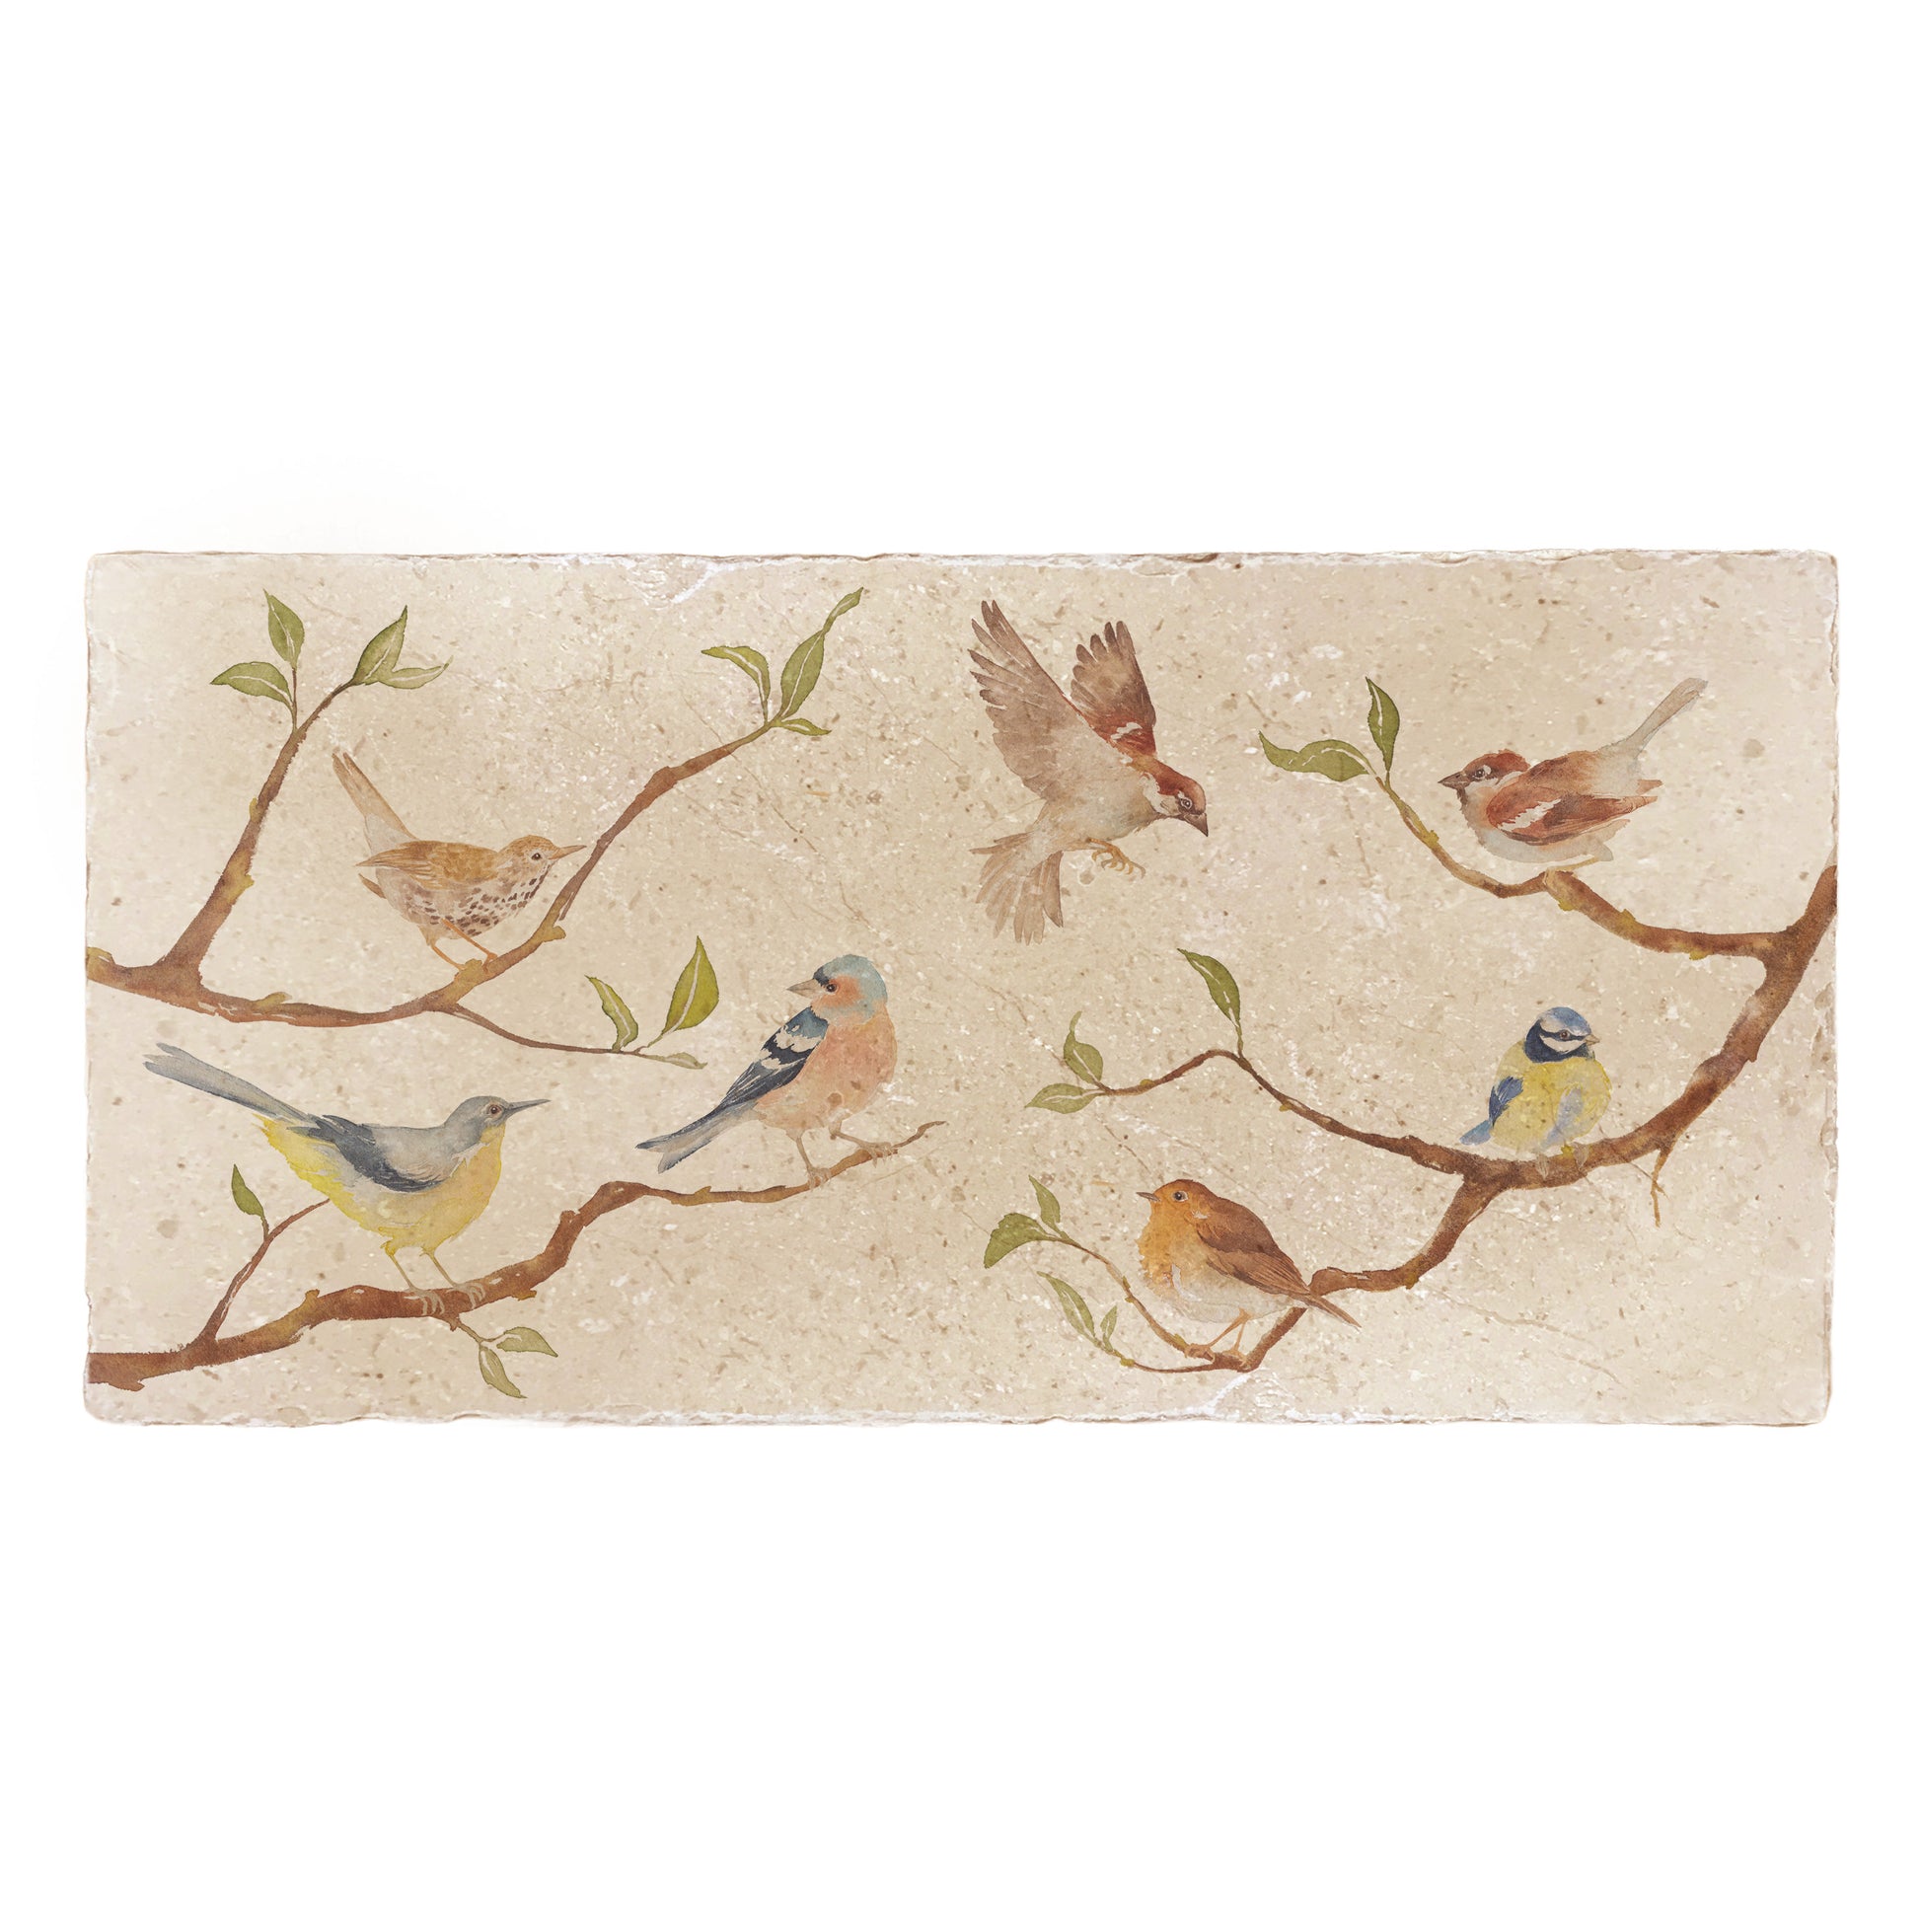 A rectangle cream multipurpose marble sharing platter, featuring a watercolour design of British garden birds on branches.